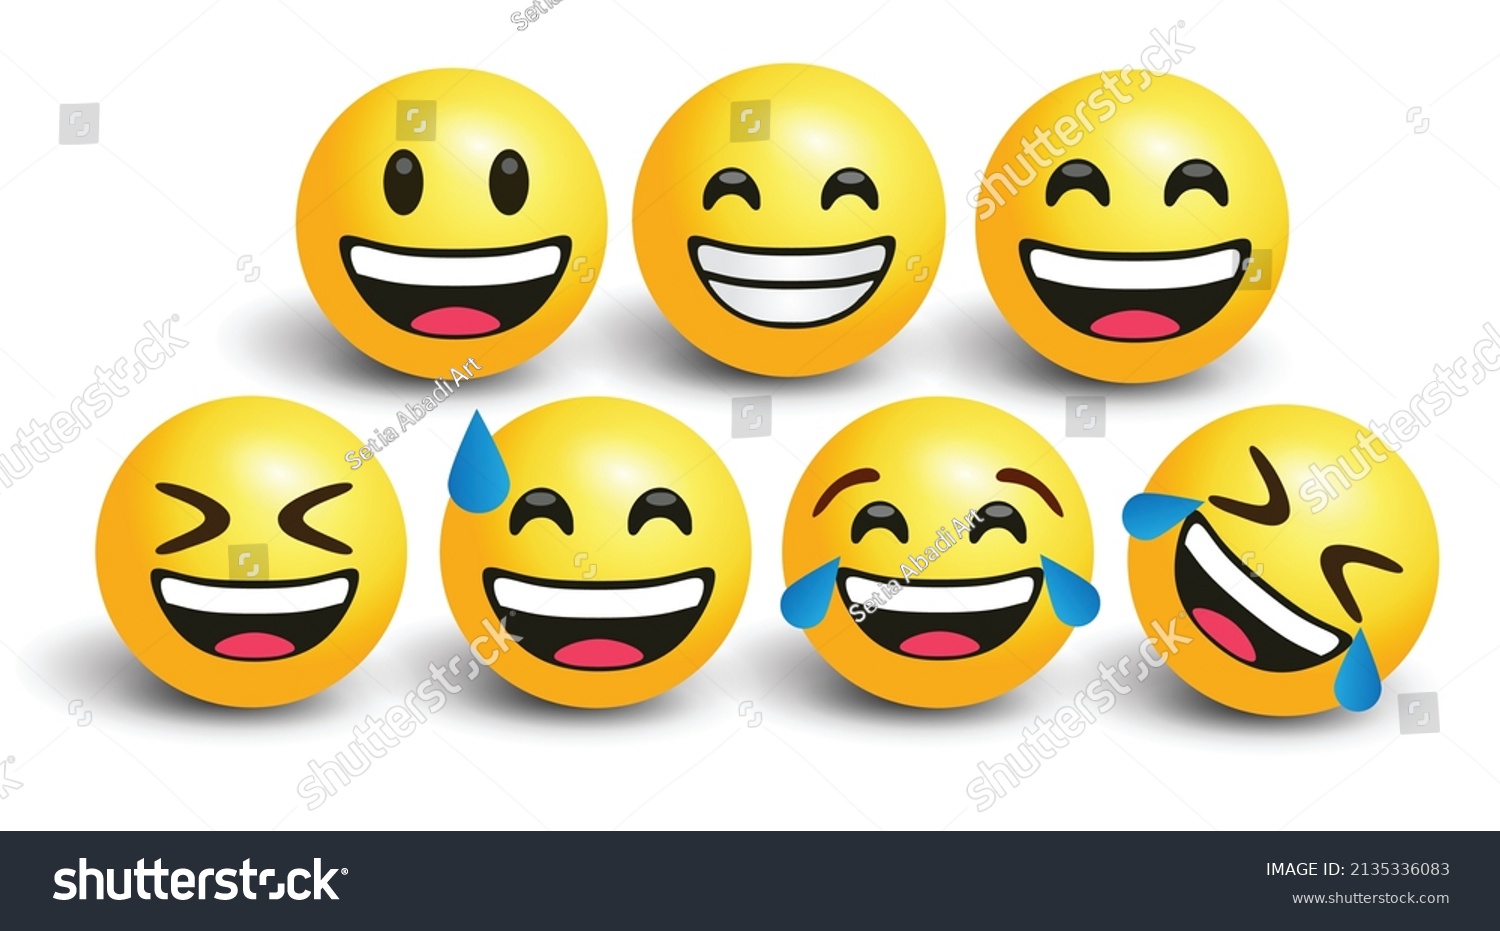 SVG of high quality icon 3d vector round yellow bubble emoticons social media Exercise Grinning Tears ROFL LOL Sweat Laughing chat comment reactions template face tear laughter emoji character message svg